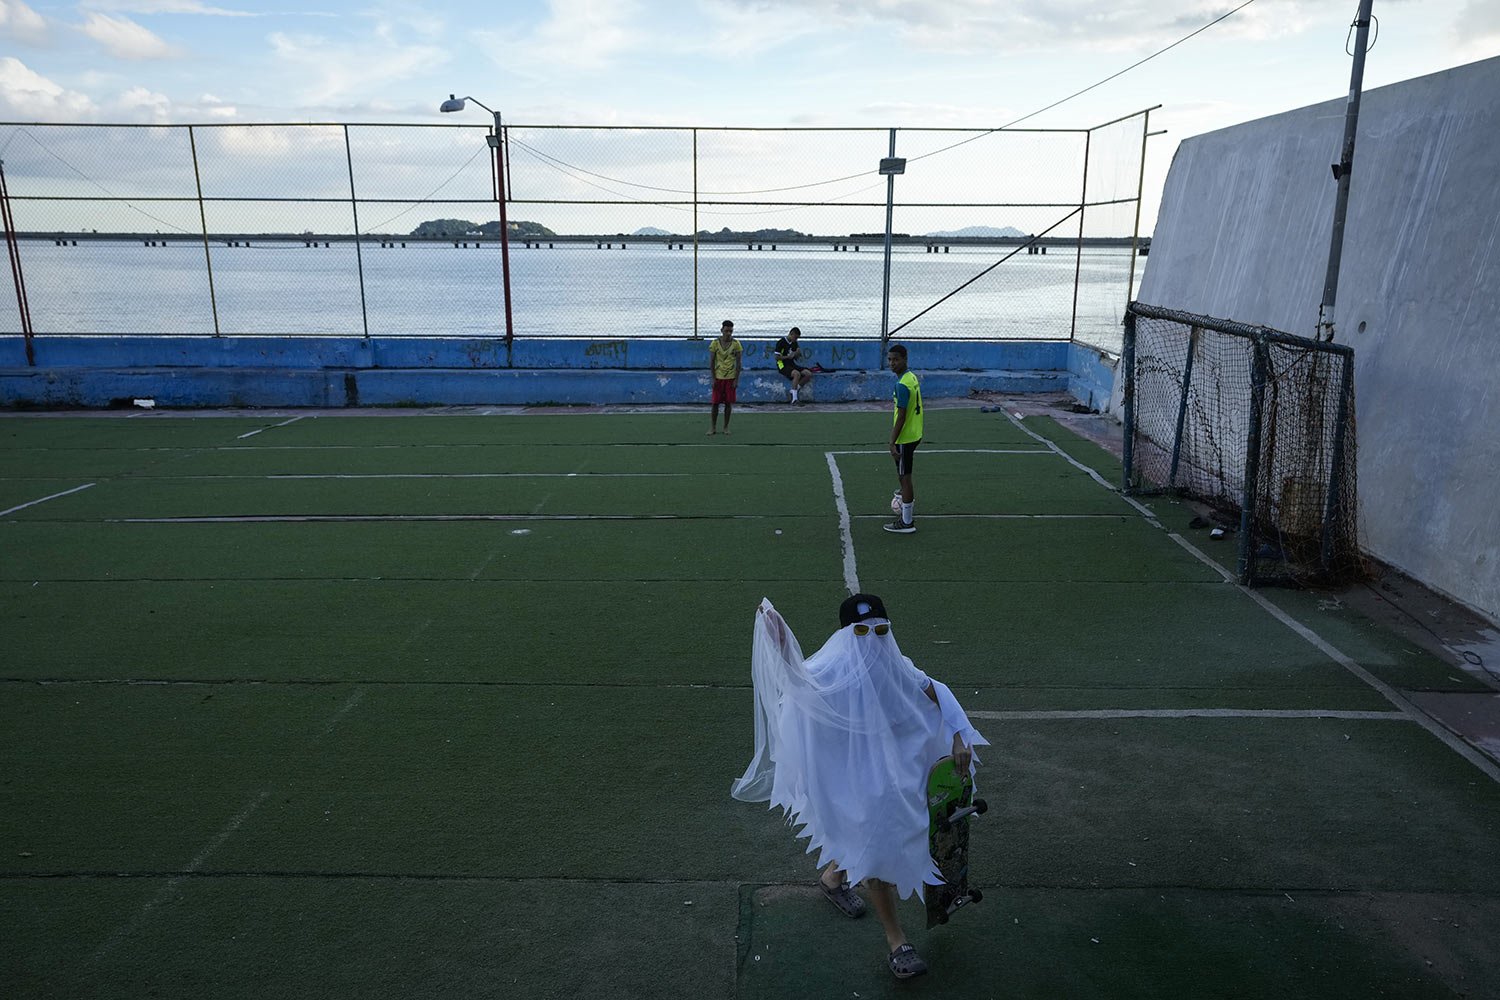  A boy wearing a ghost costume walks past soccer players while trick-or-treating in Panama City, Friday, Oct. 28, 2022. (AP Photo/Arnulfo Franco) 